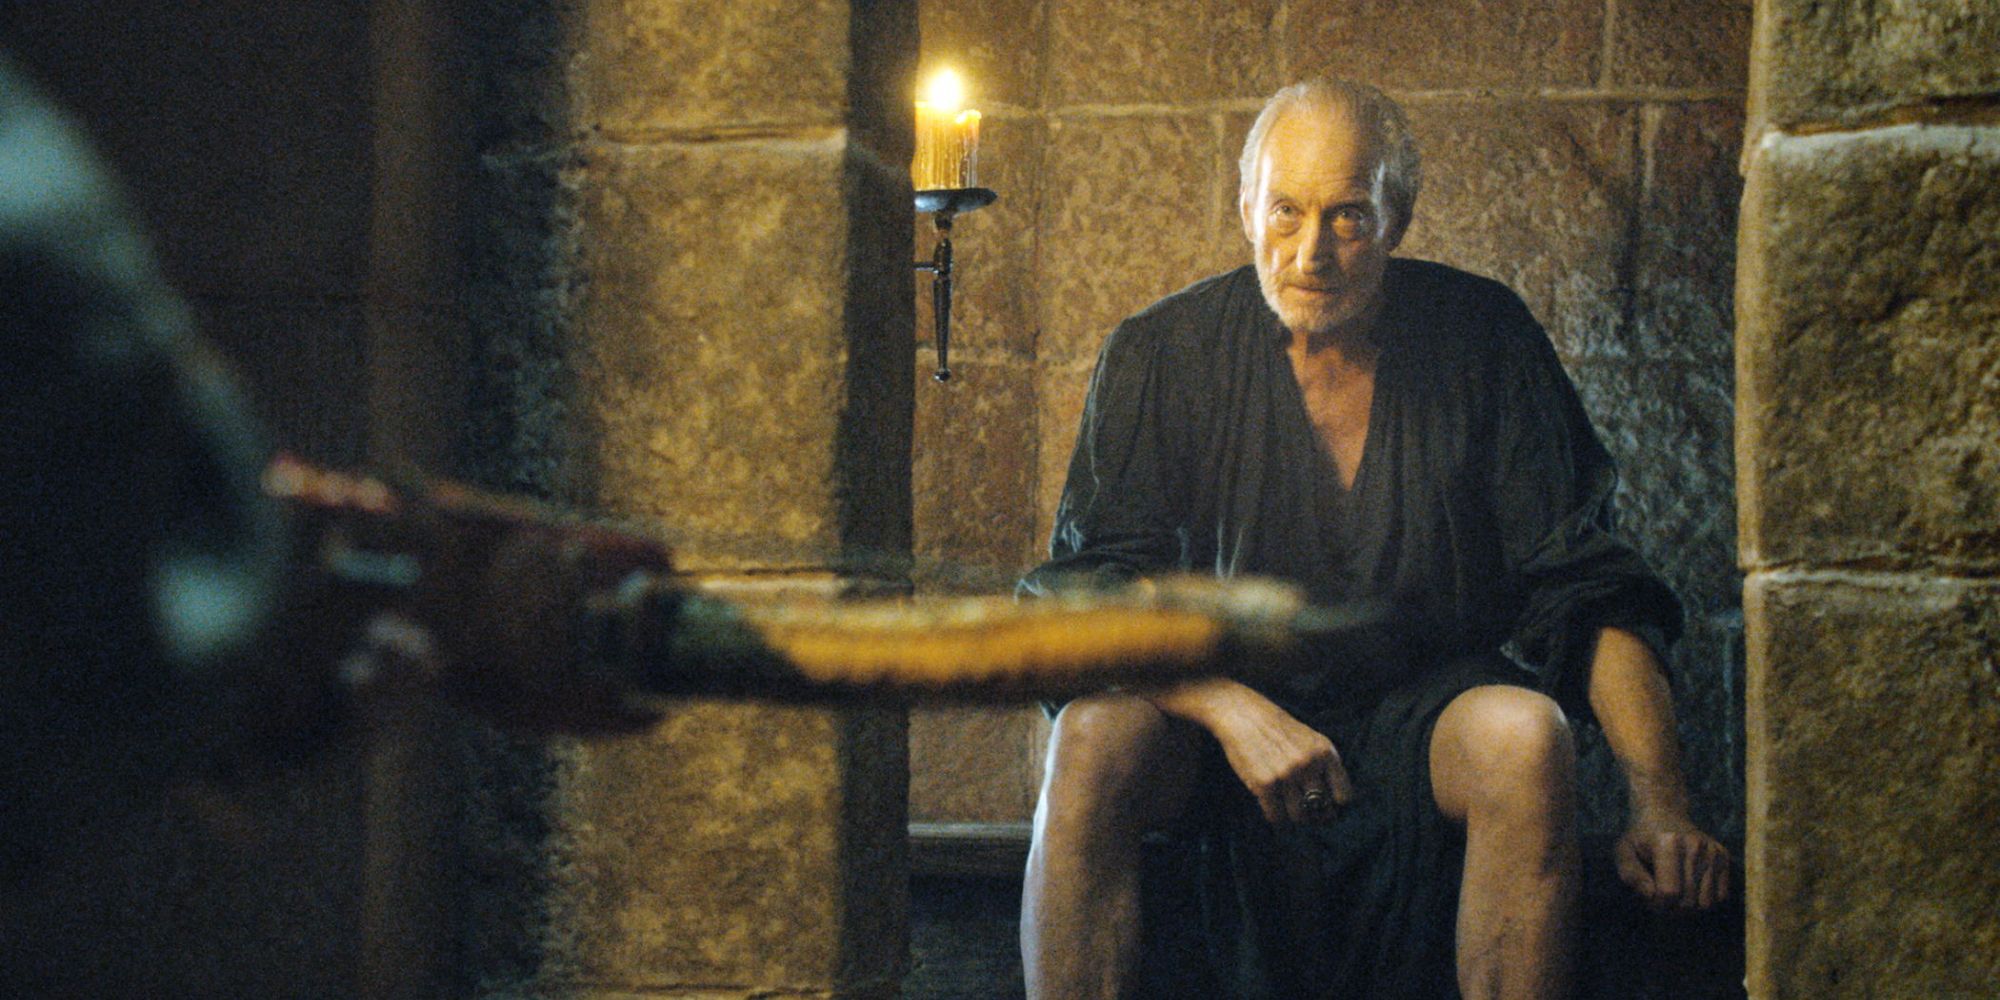 Tywin Lannister facing Tyrion, who wields a crossbow, in Game of Thrones season 4, episode 10